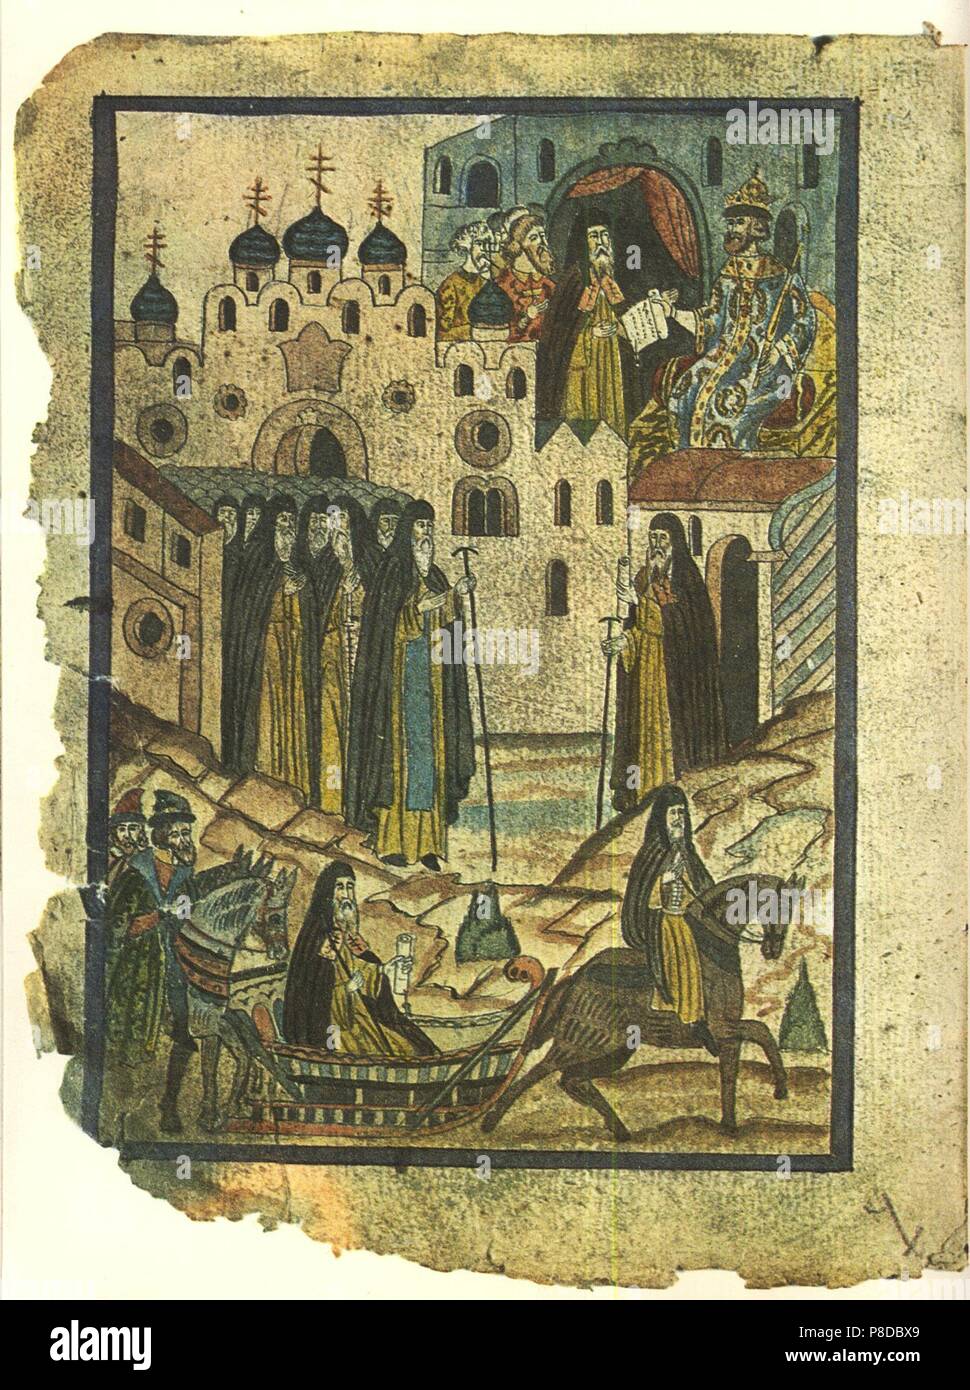 Story of the Solovetsky Monastery Uprising (Facsimile of an Illuminated Manuscript). Museum: PRIVATE COLLECTION. Stock Photo